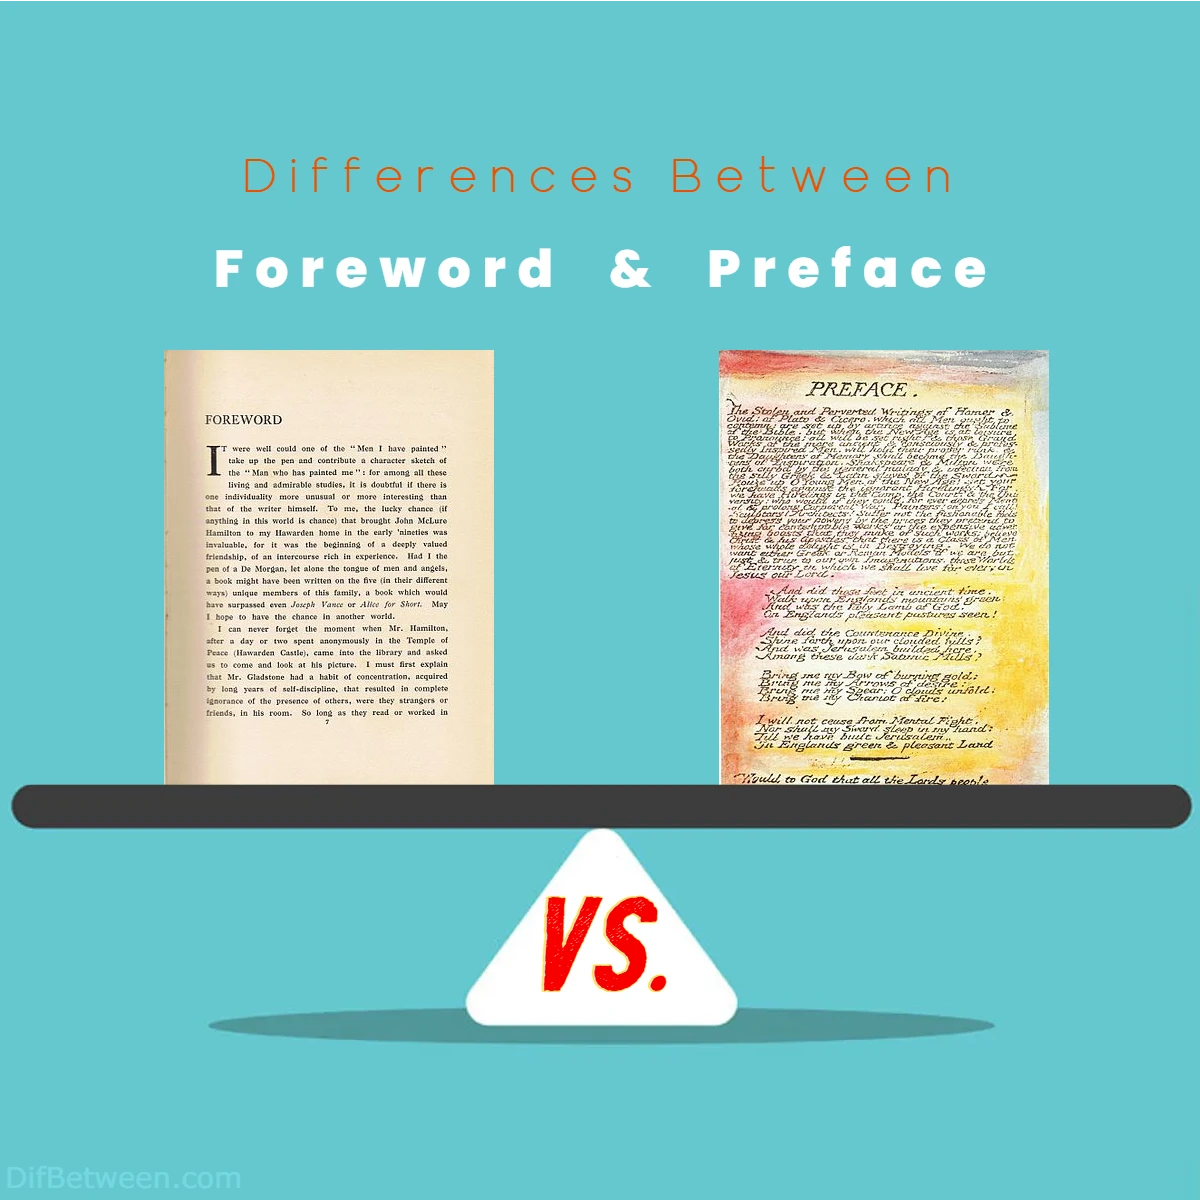 Differences Between Foreword vs Preface